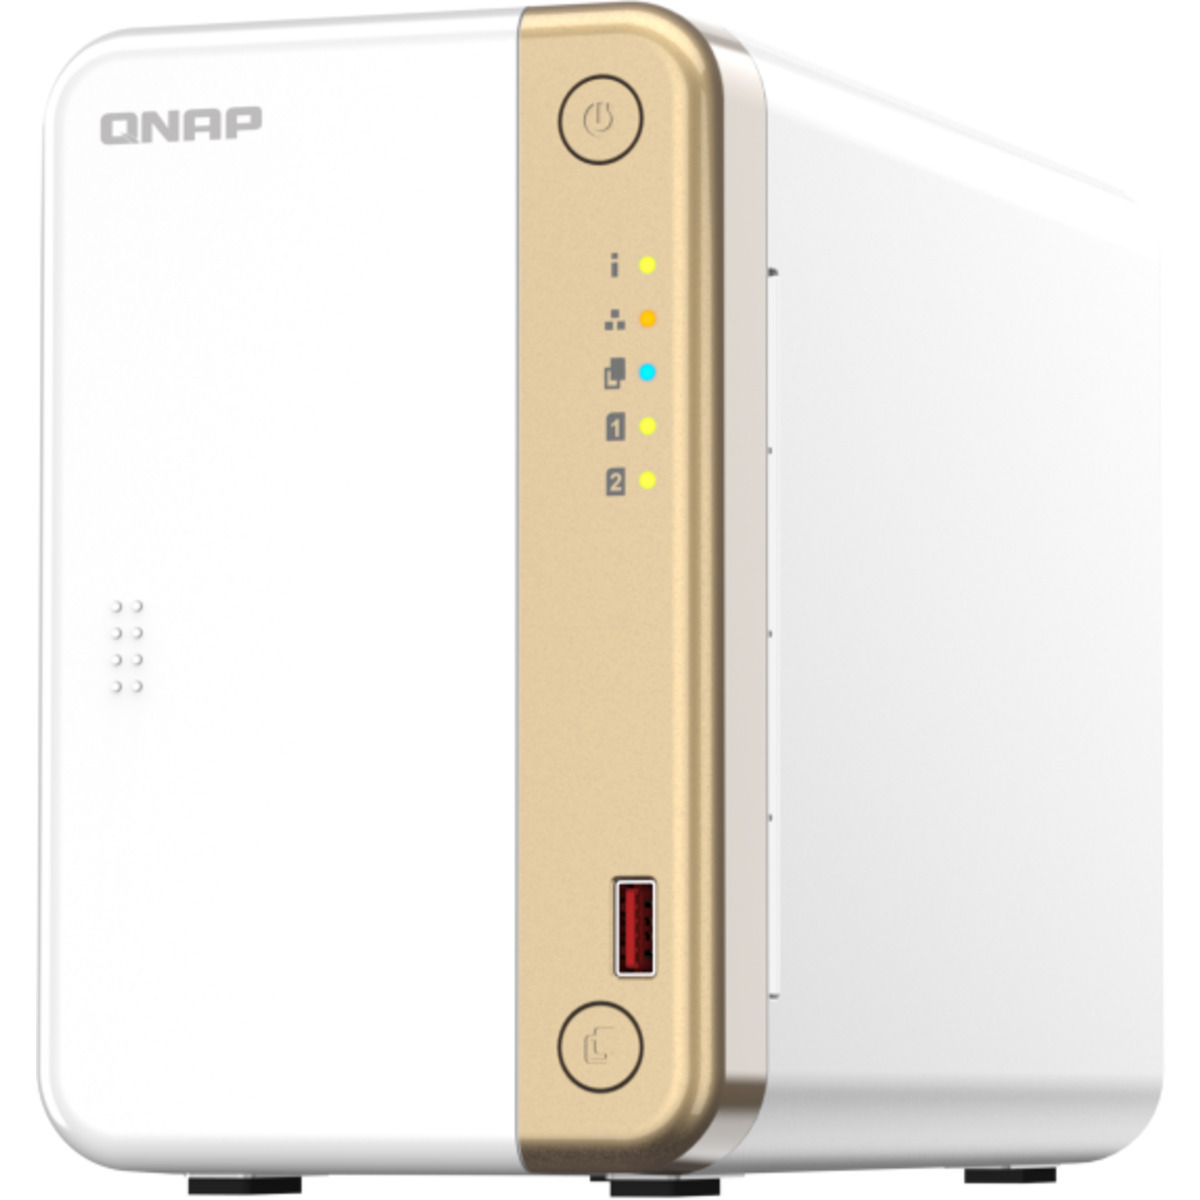 QNAP TS-262 24tb 2-Bay Desktop Personal / Basic Home / Small Office NAS - Network Attached Storage Device 2x12tb Seagate IronWolf Pro ST12000NT001 3.5 7200rpm SATA 6Gb/s HDD NAS Class Drives Installed - Burn-In Tested - ON SALE TS-262